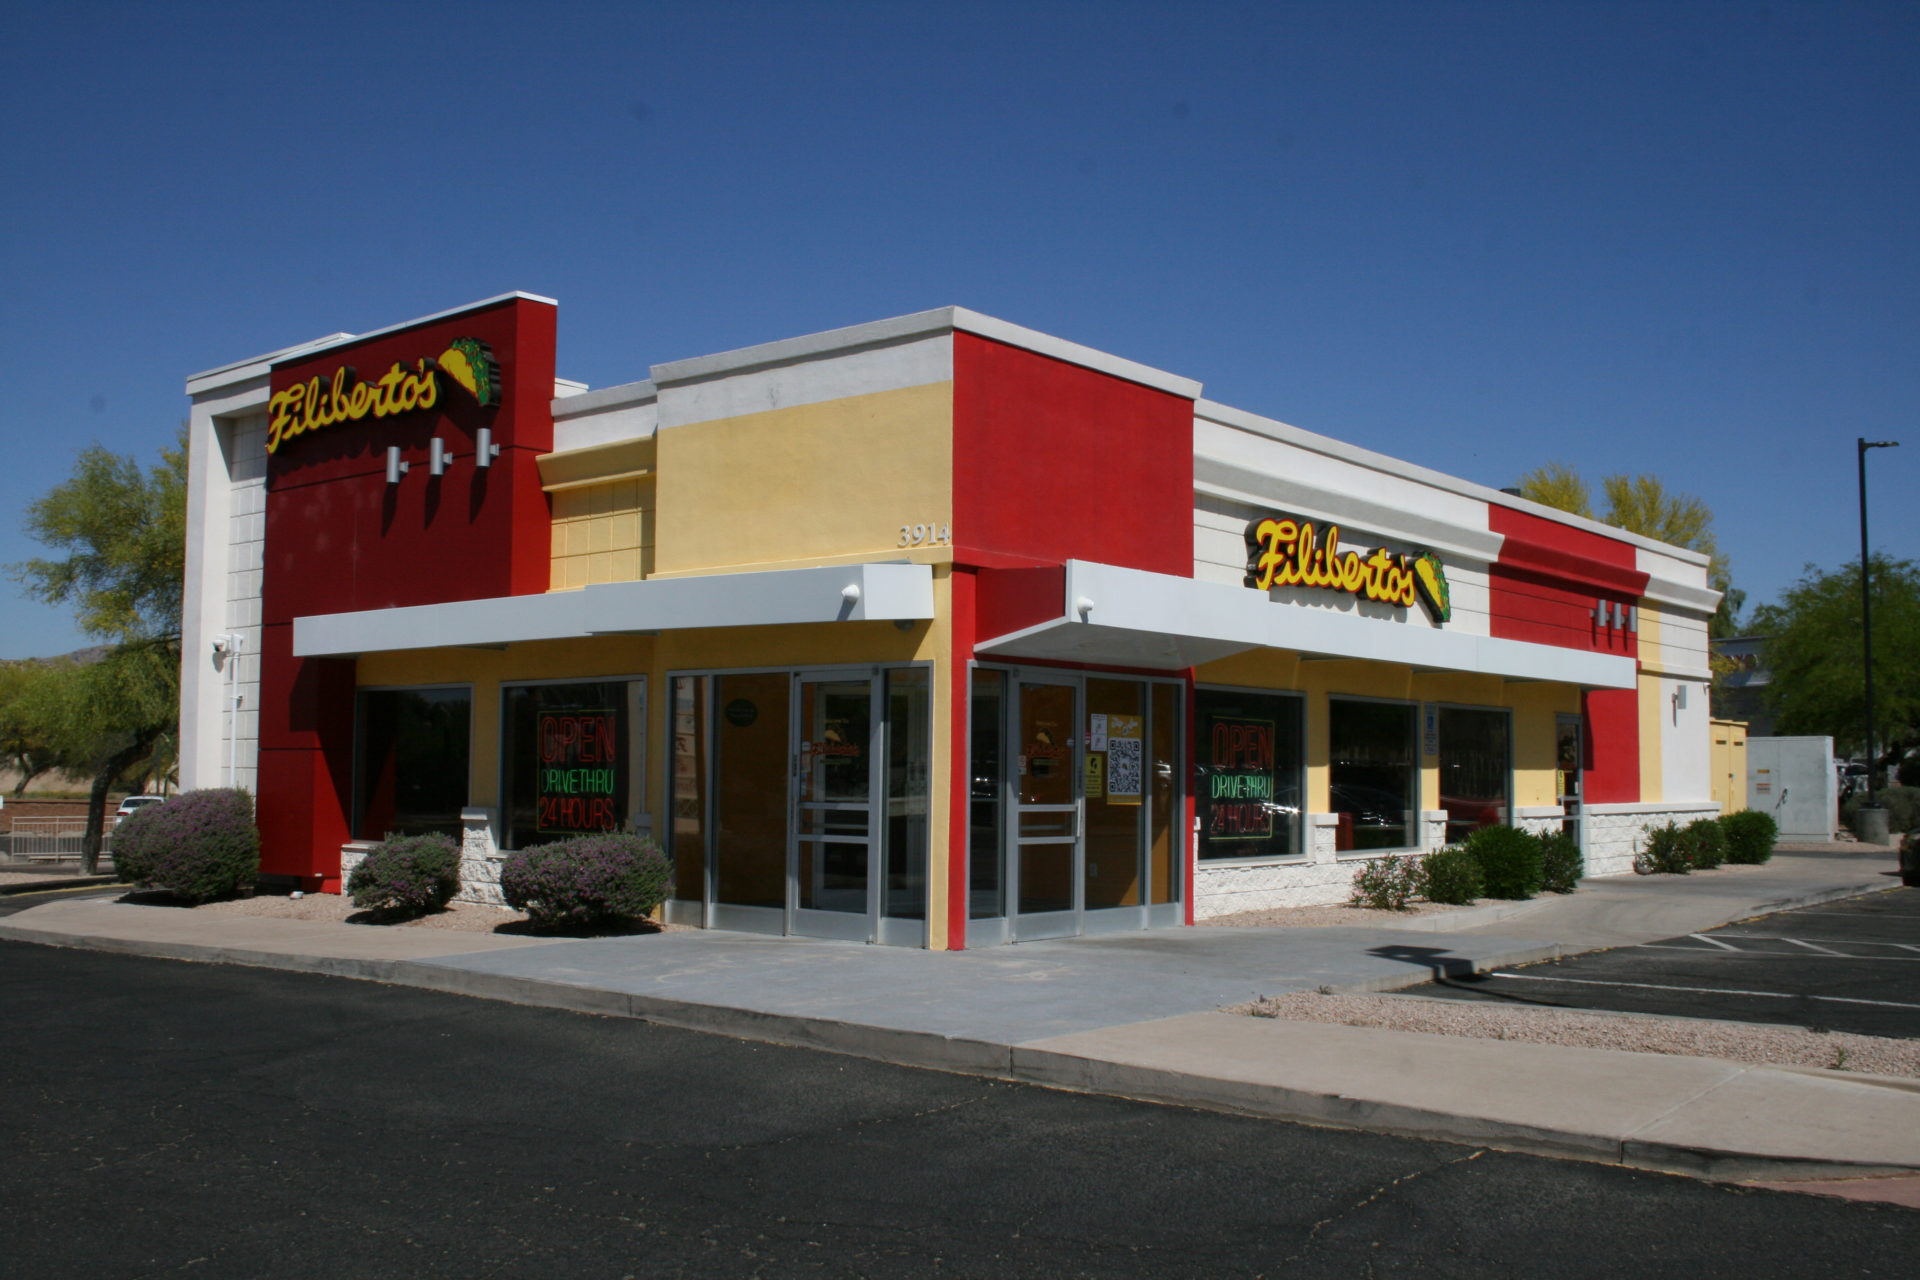 A restaurant with red and yellow walls on the side of the street.